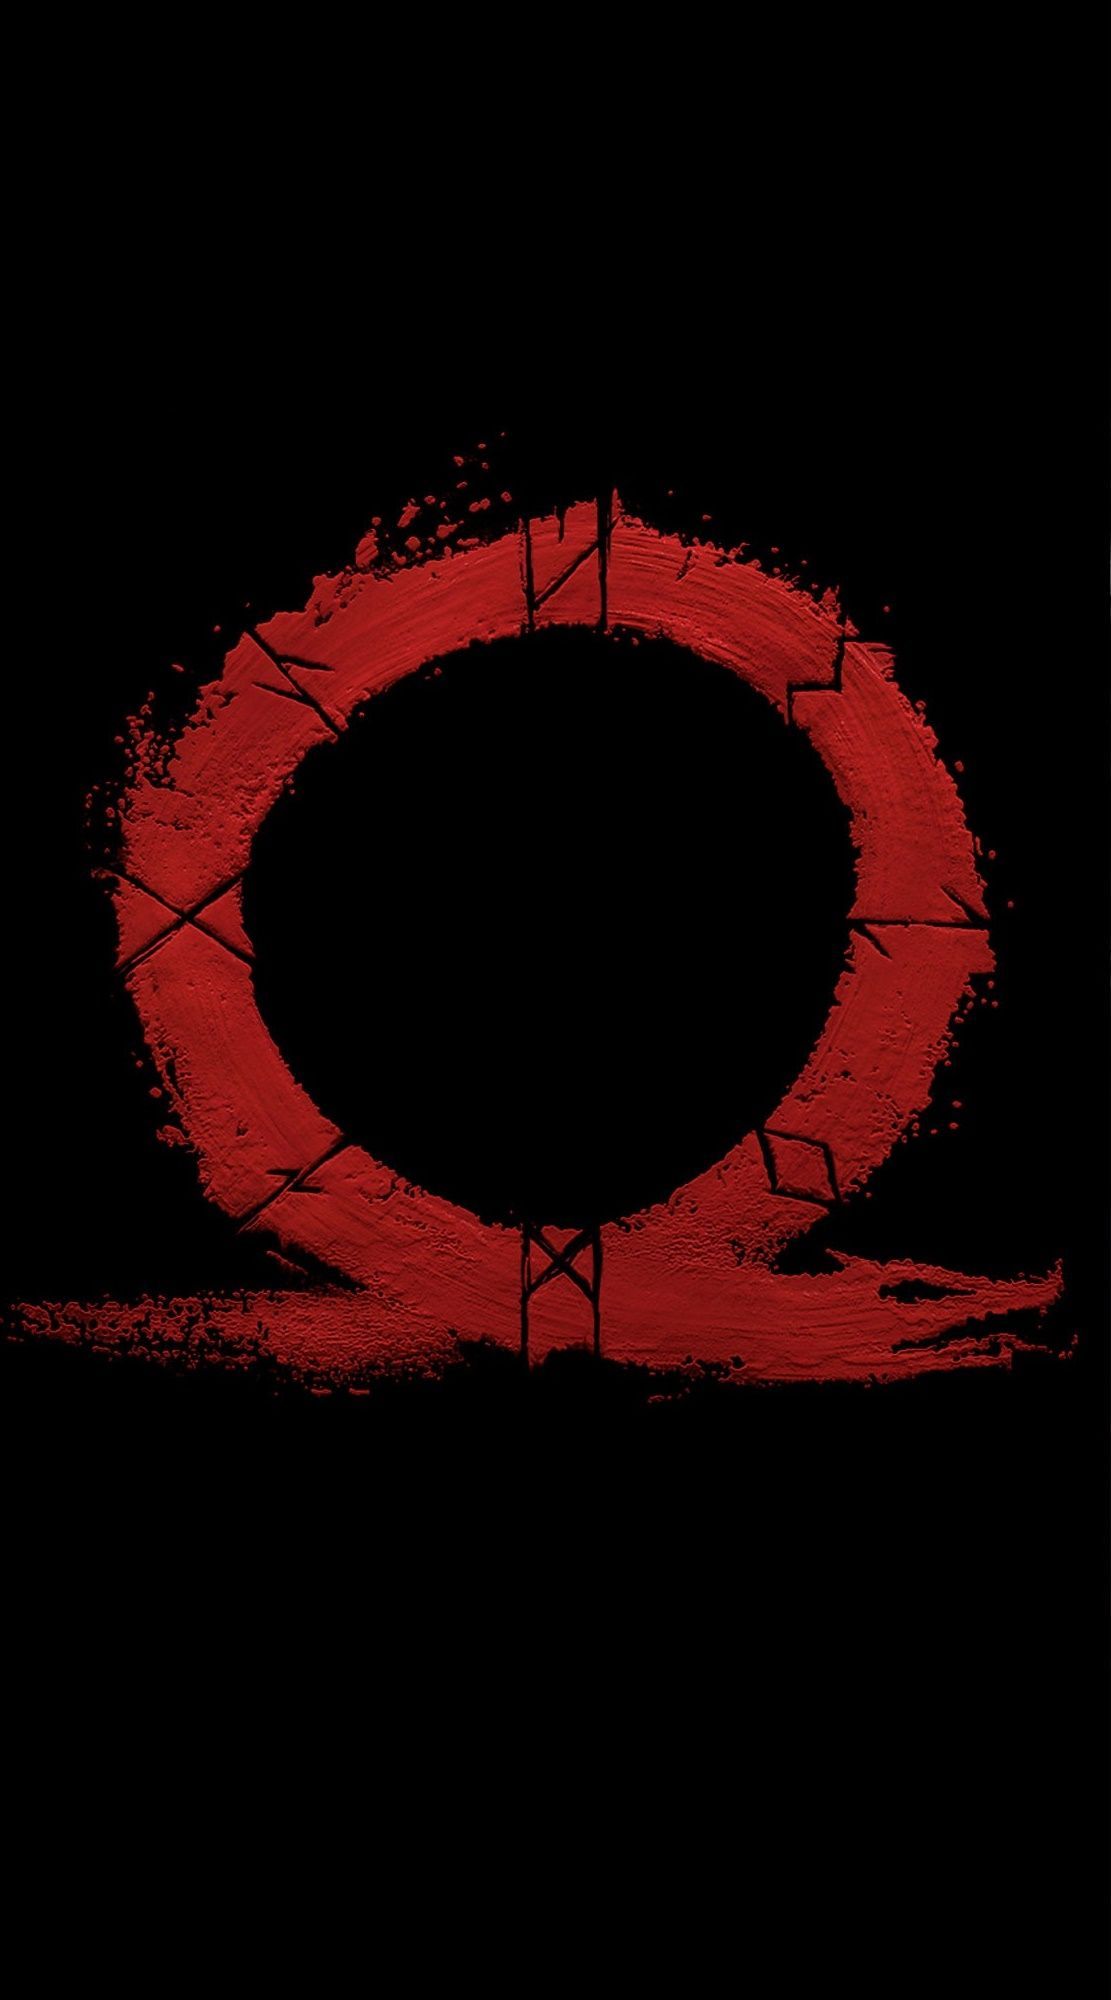 AMOLED Logo Wallpaper. AMOLED Wallpaper. Black Background. Dark Wallpaper for Android and iPhone 81367385. Dark wallpaper, Kratos god of war, God of war